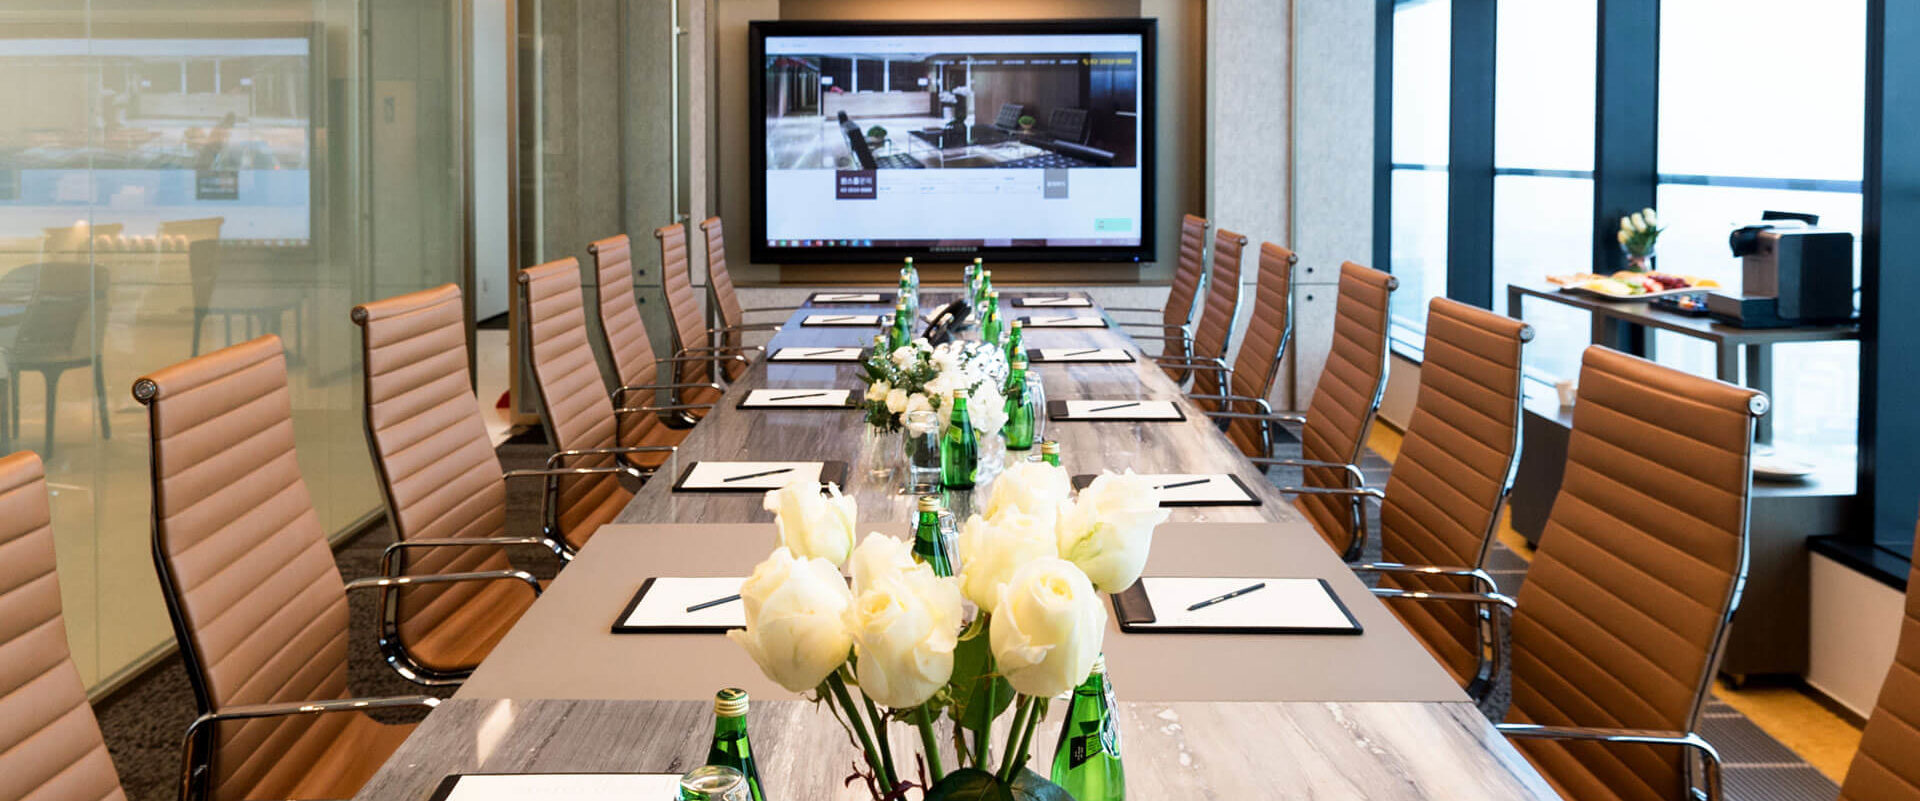 What Are Extra Services Offered By Meeting Room Facilities?